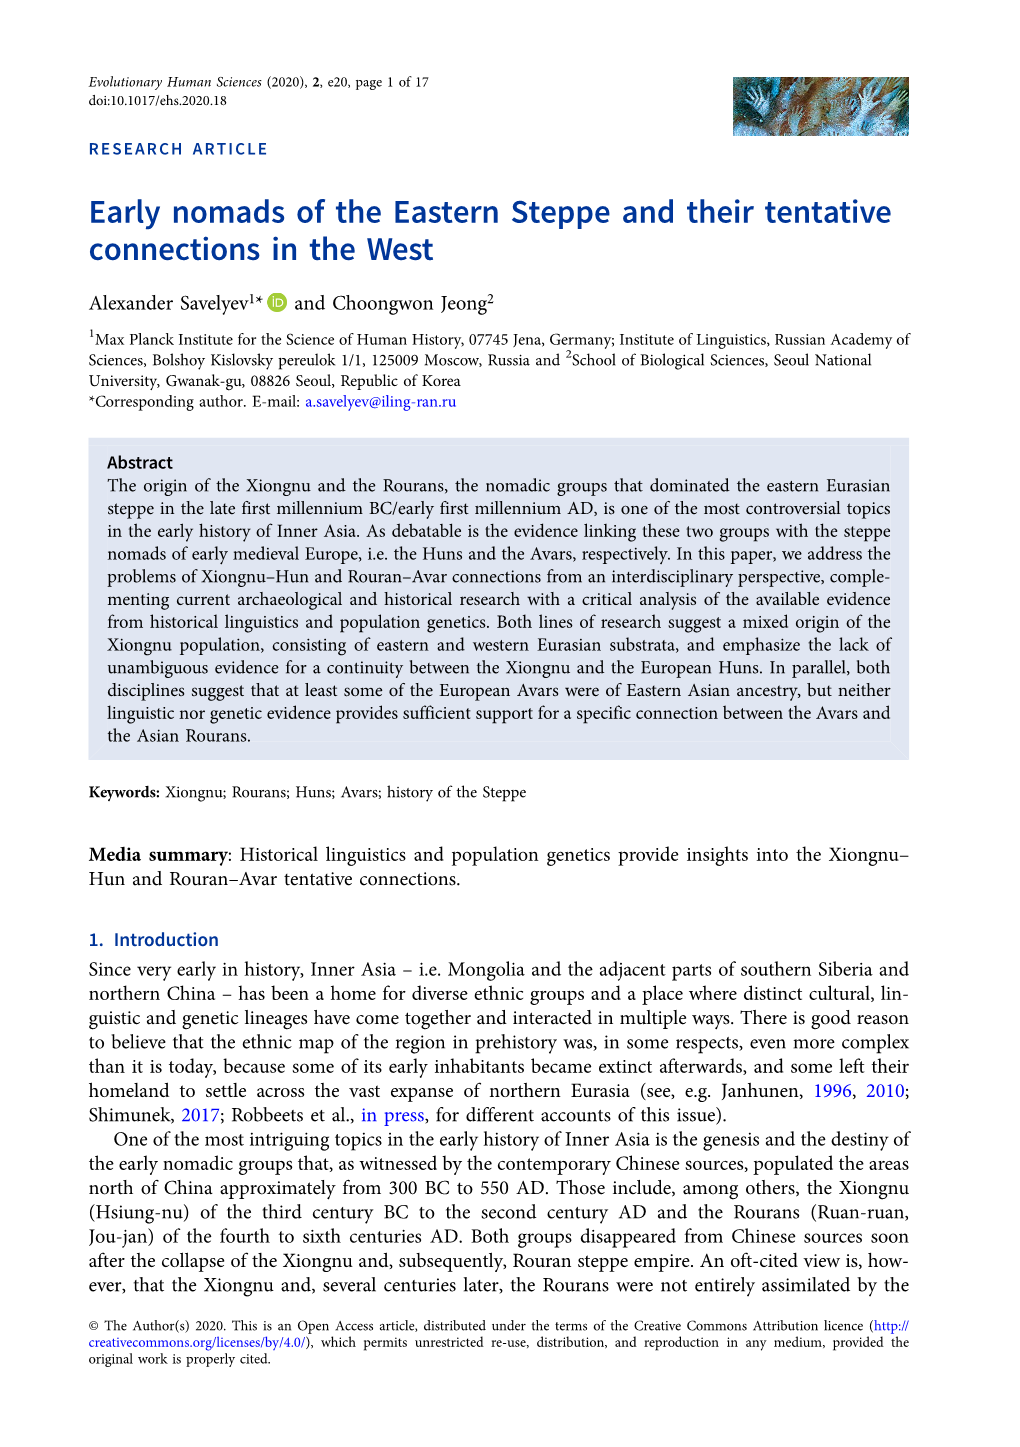 Early Nomads of the Eastern Steppe and Their Tentative Connections in the West